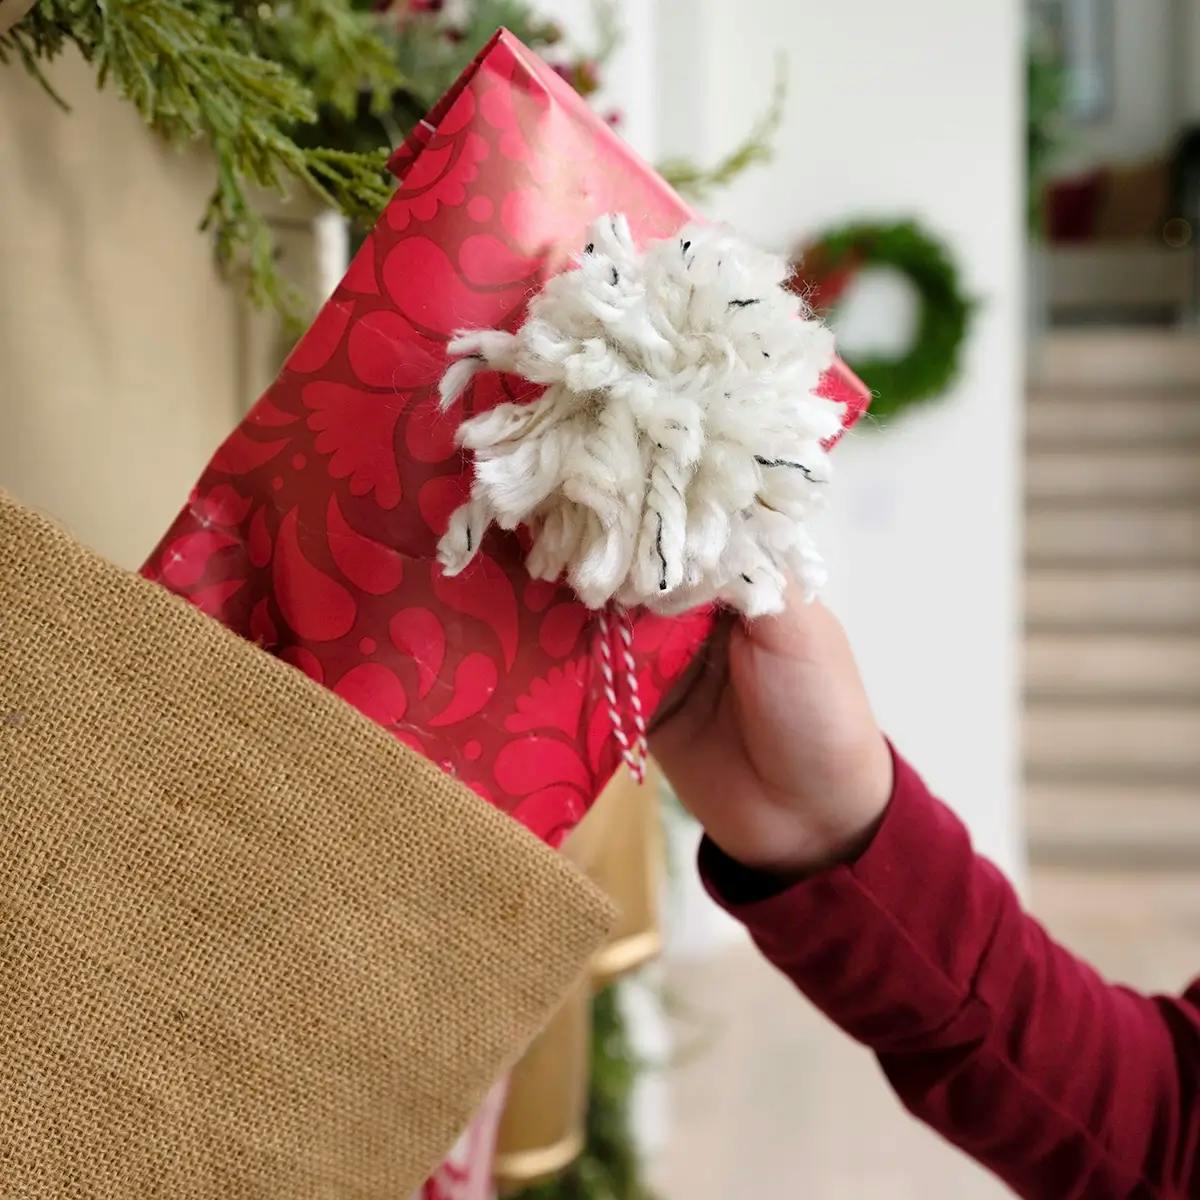 A hand placing a gift into a stocking, in a gift bag made from wrapping paper.